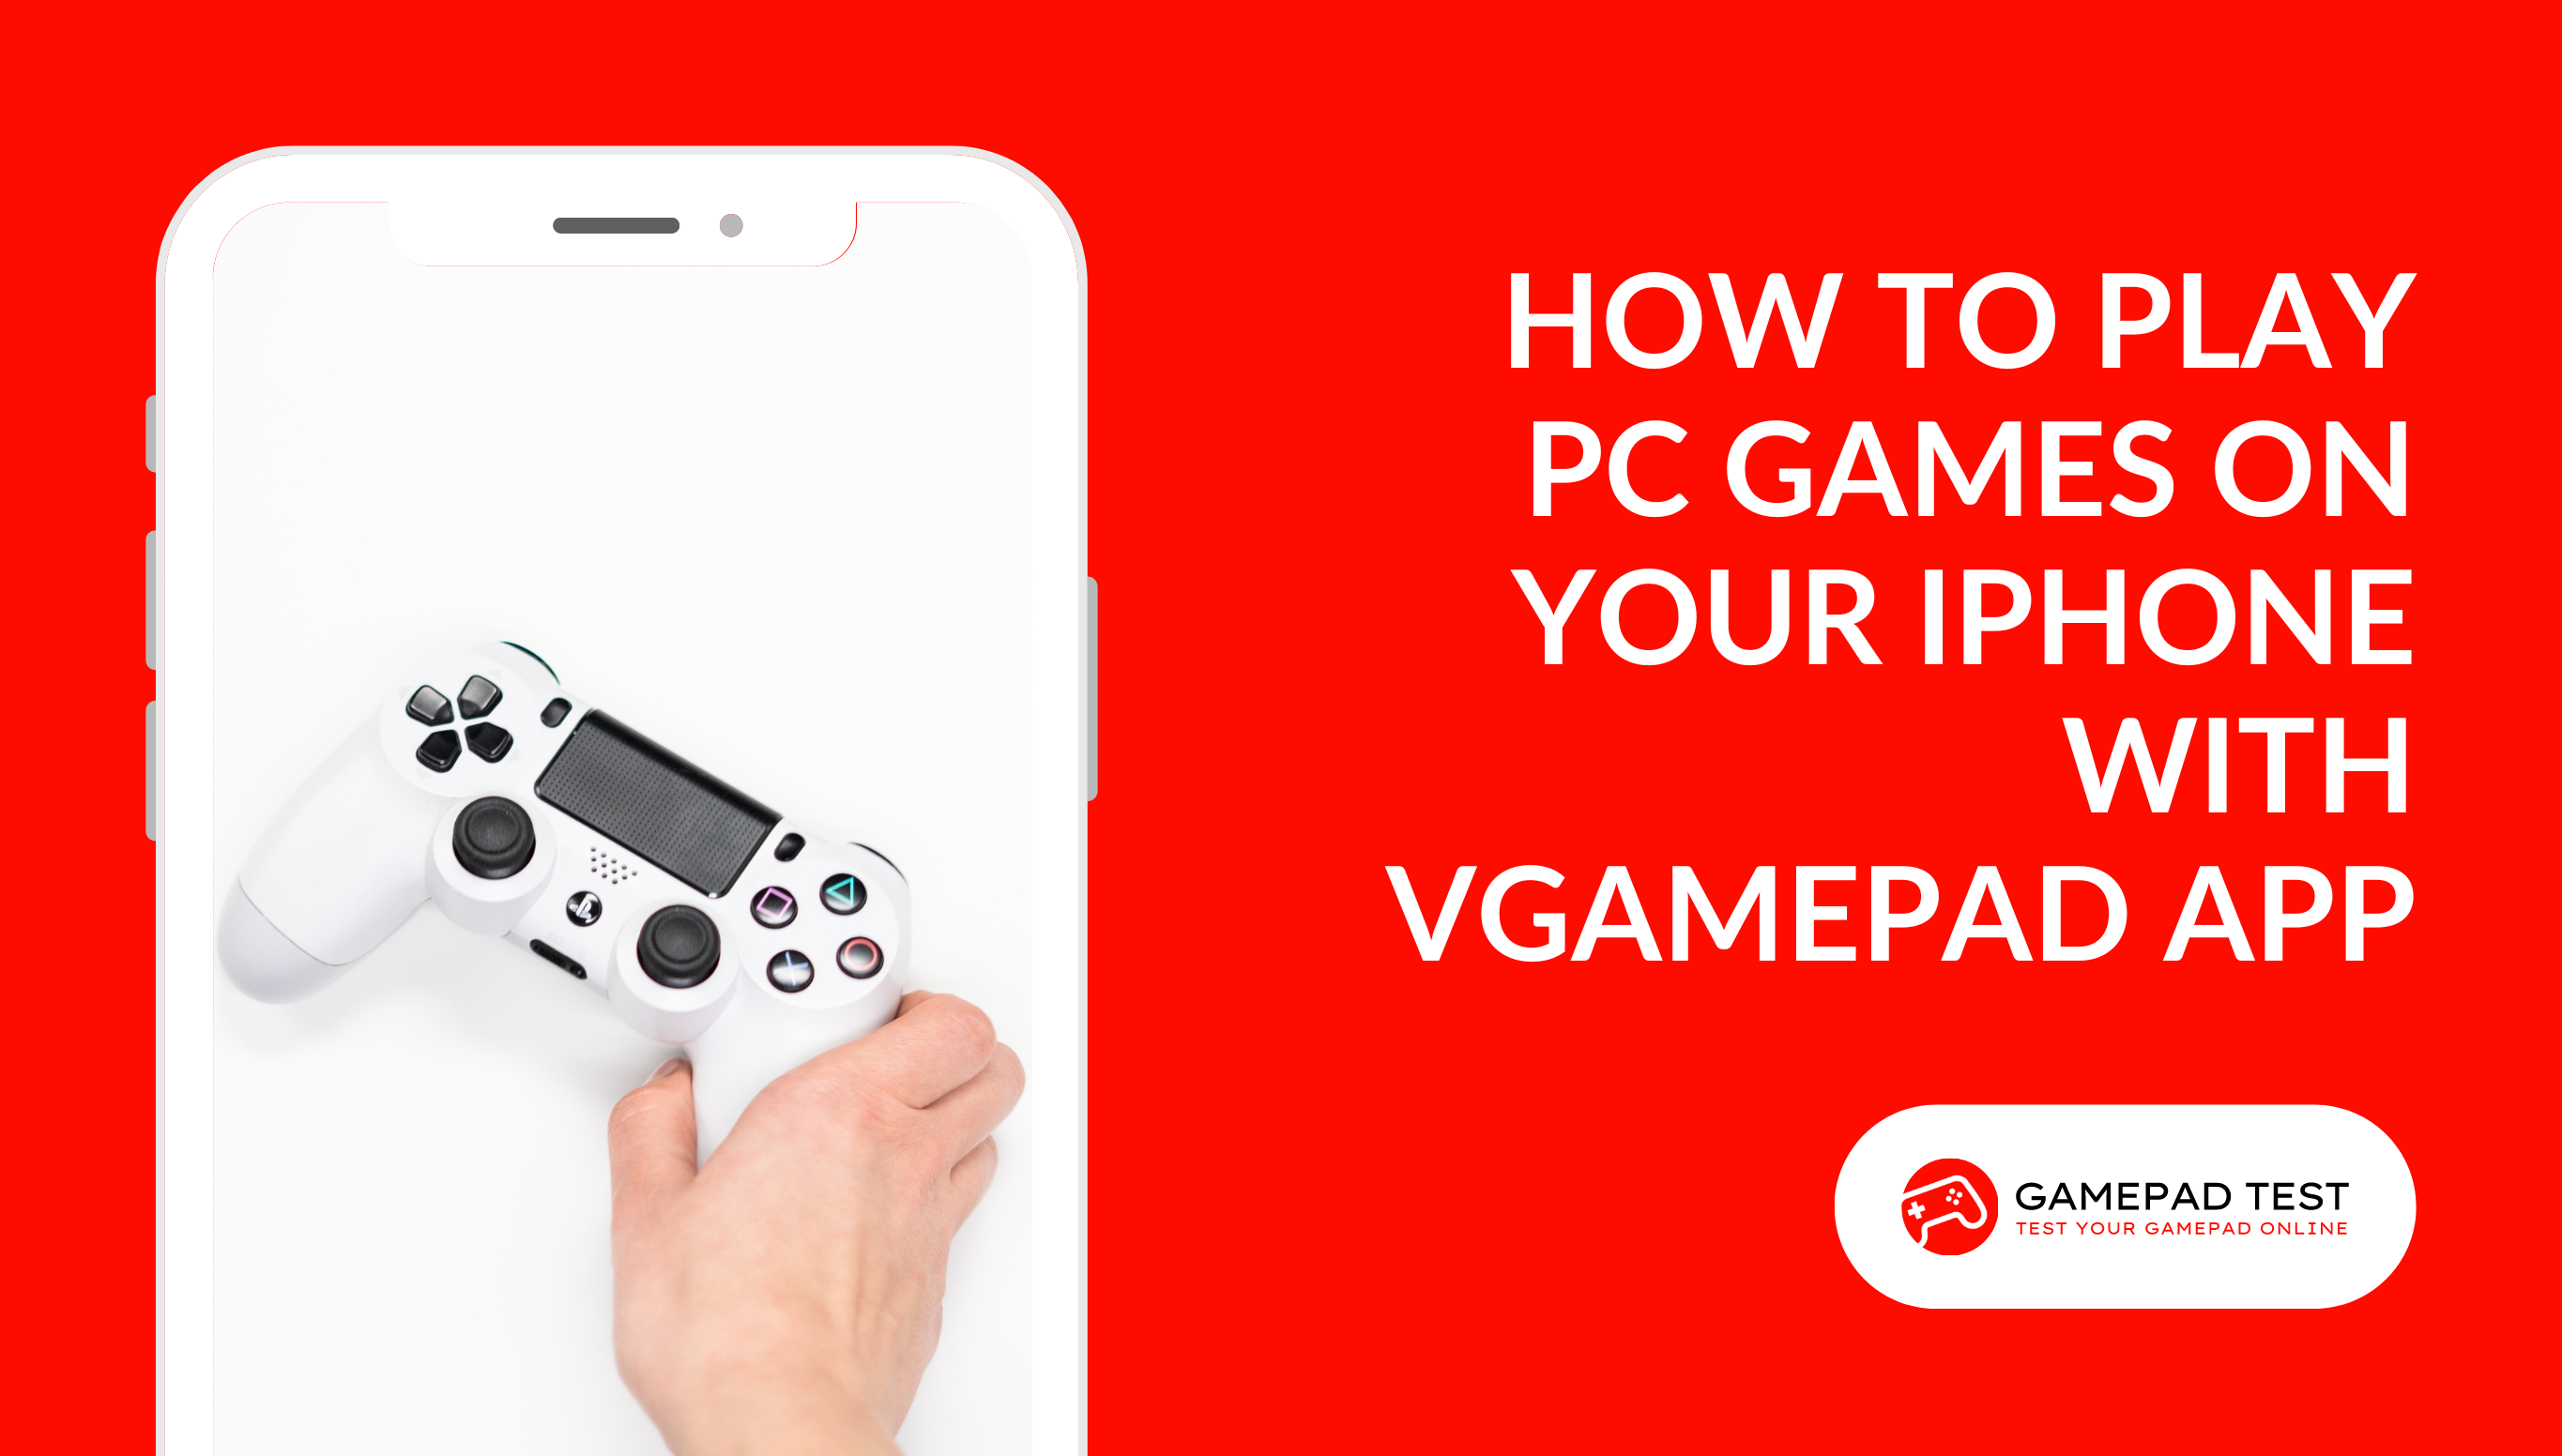 How to Play PC Games on Your iPhone with VGamepad App